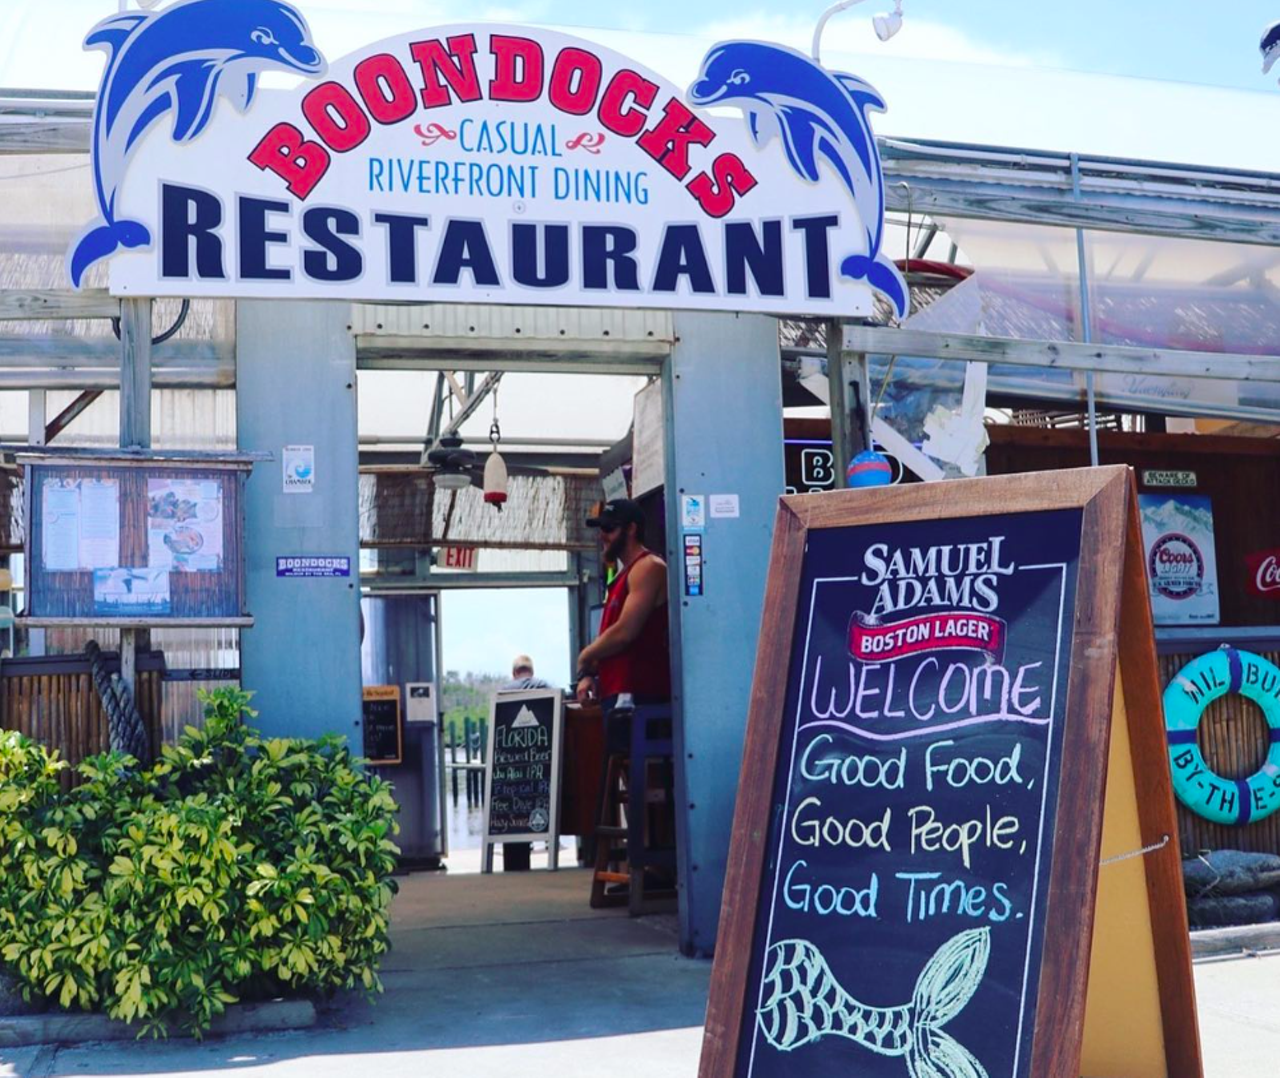 Boondocks Restaurant
704 S. Lakeshore Blvd., Howey-In-The-Hills
Located along the Halifax River in Port Orange, Boondocks Restaurant's guests can enjoy quality seafood, riverside views and a pet-friendly patio.